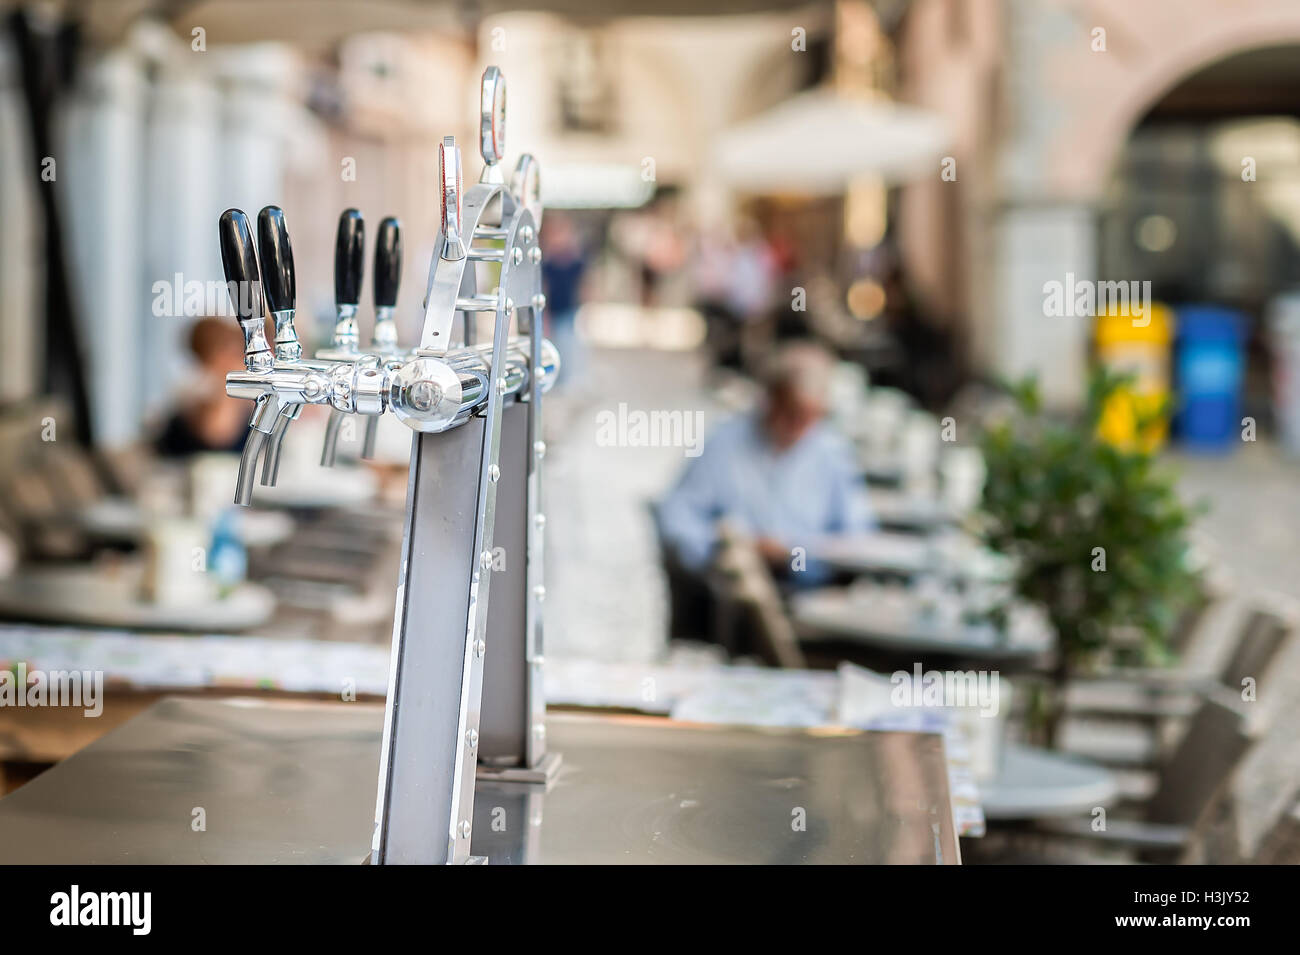 Draught beer taps and other beverages in a bar. Stock Photo